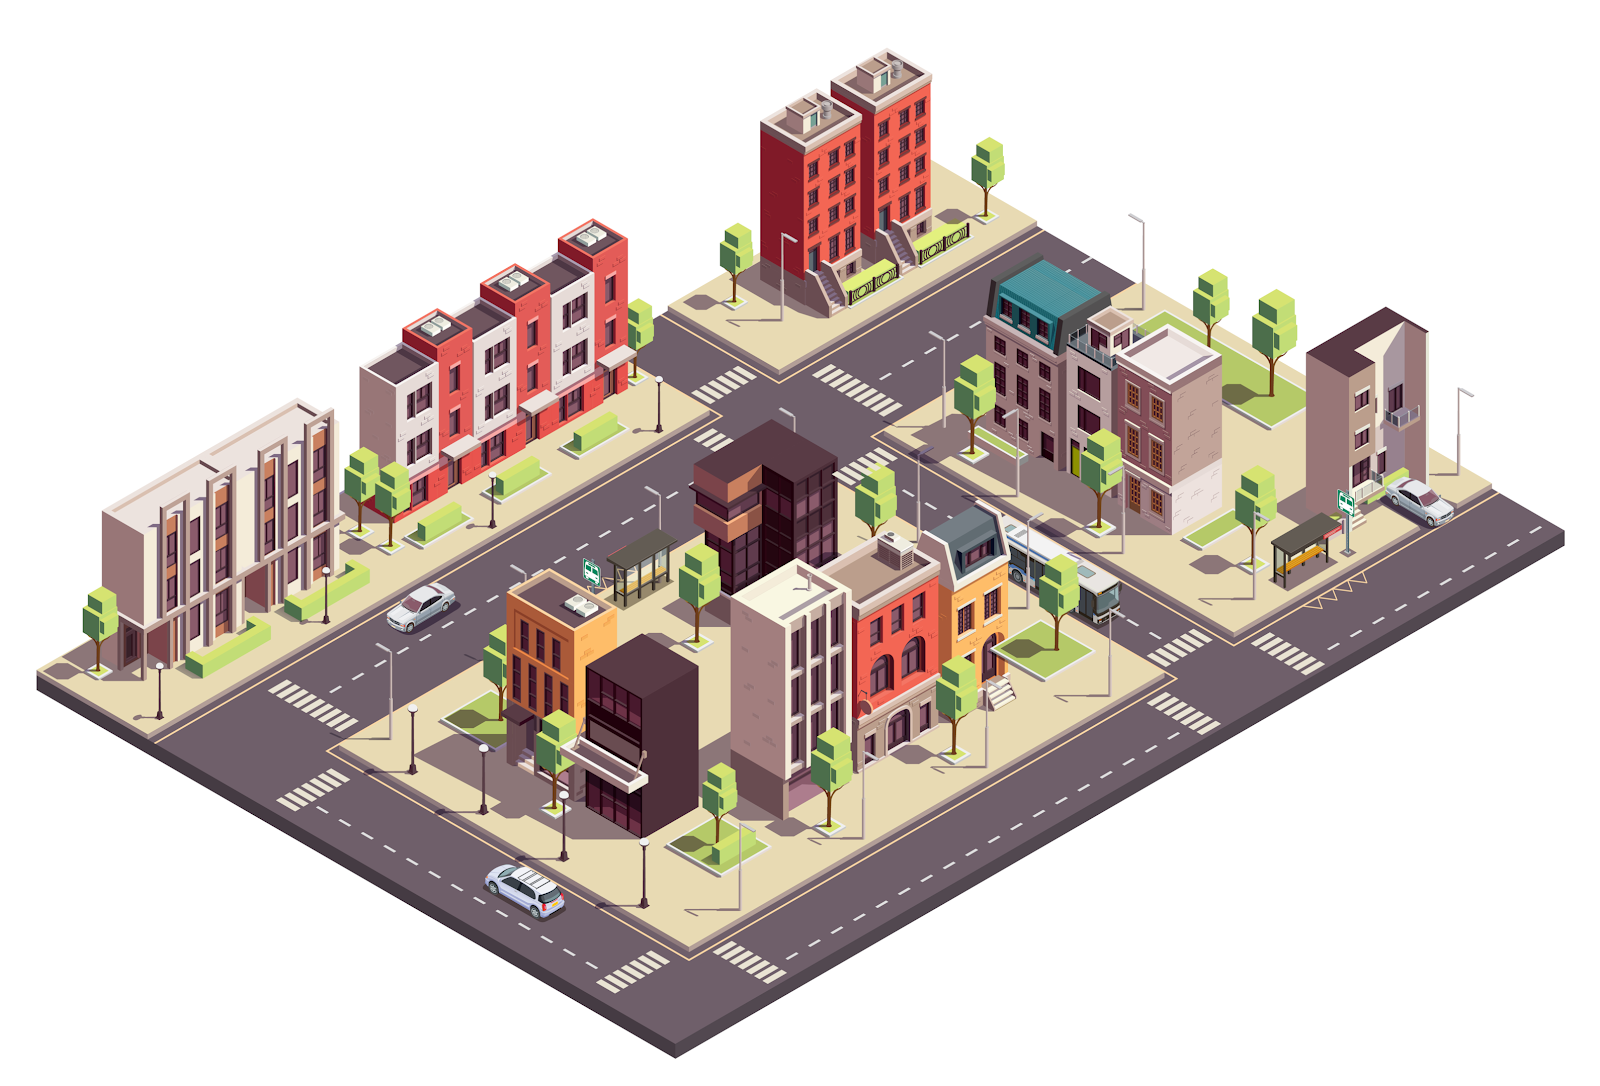 An image of a game with isometric perspective